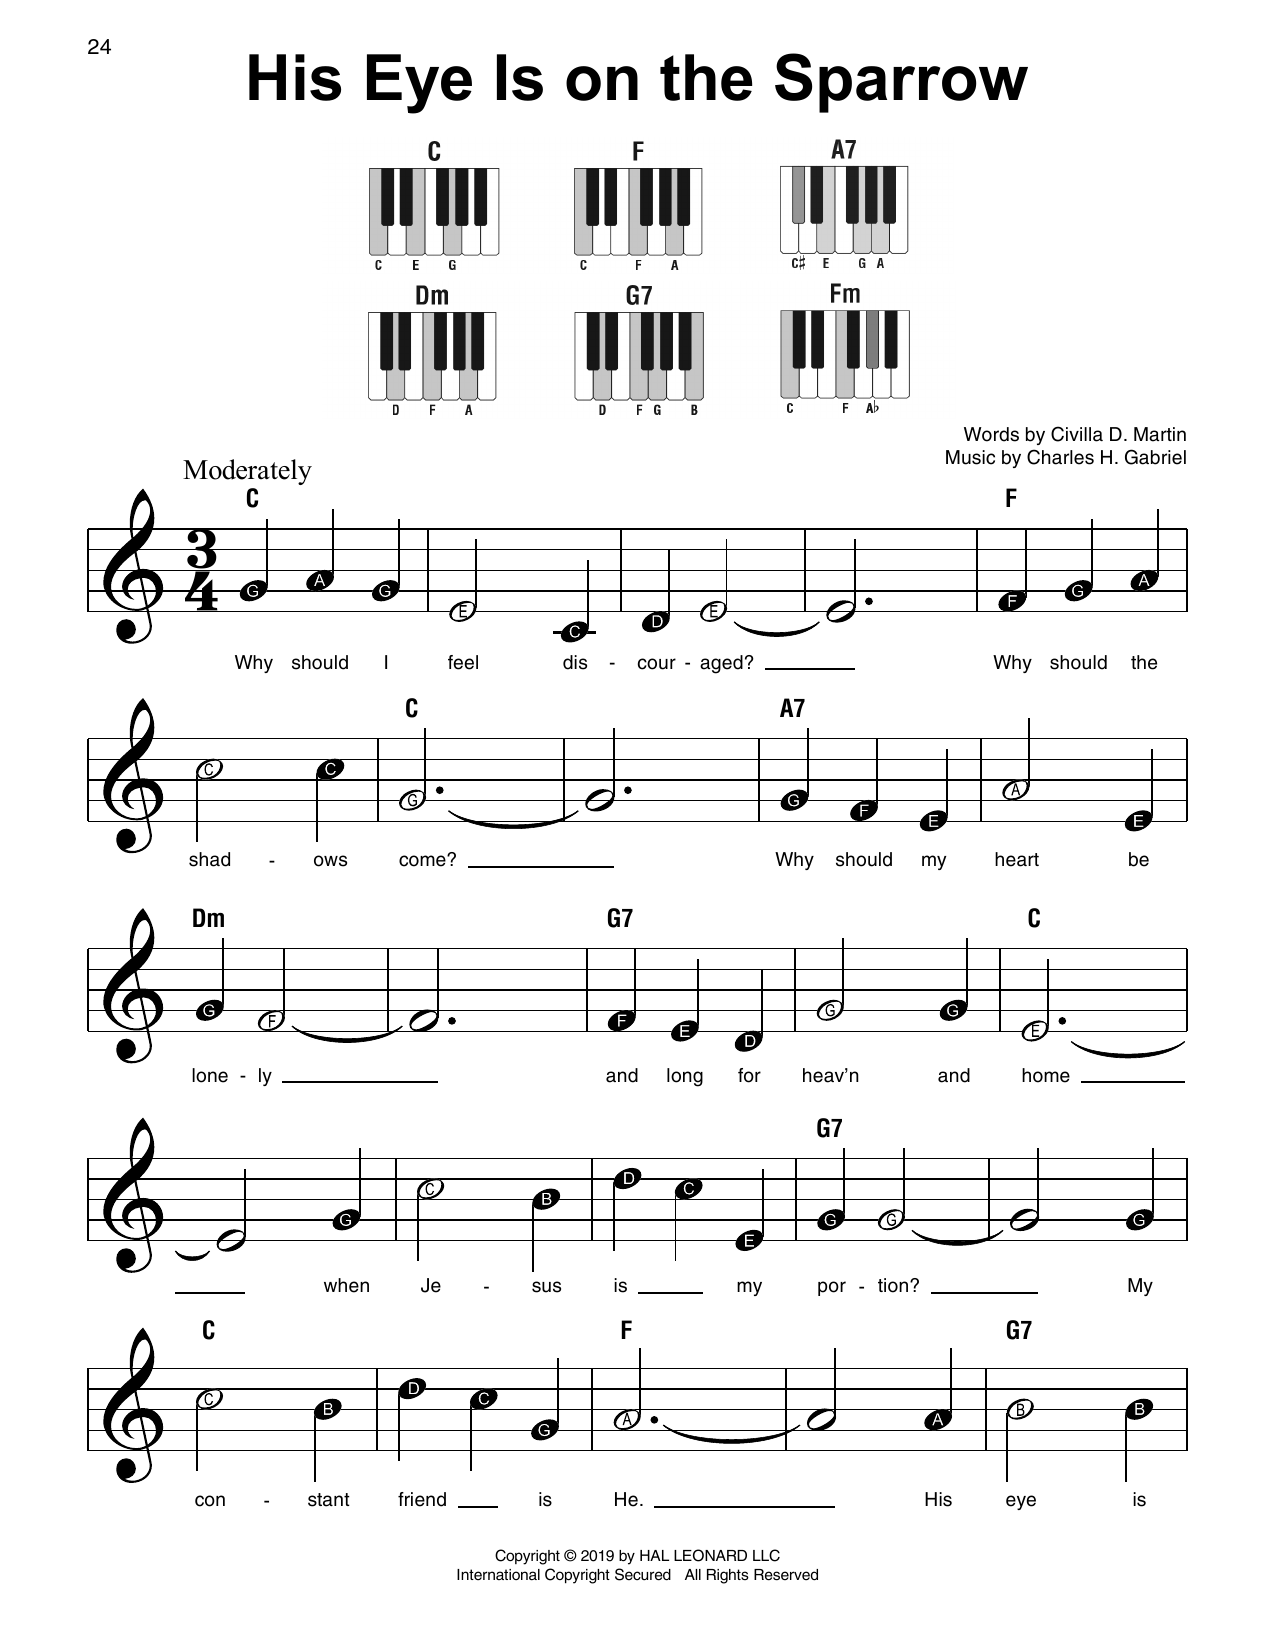 Download Civilla D. Martin His Eye Is On The Sparrow Sheet Music